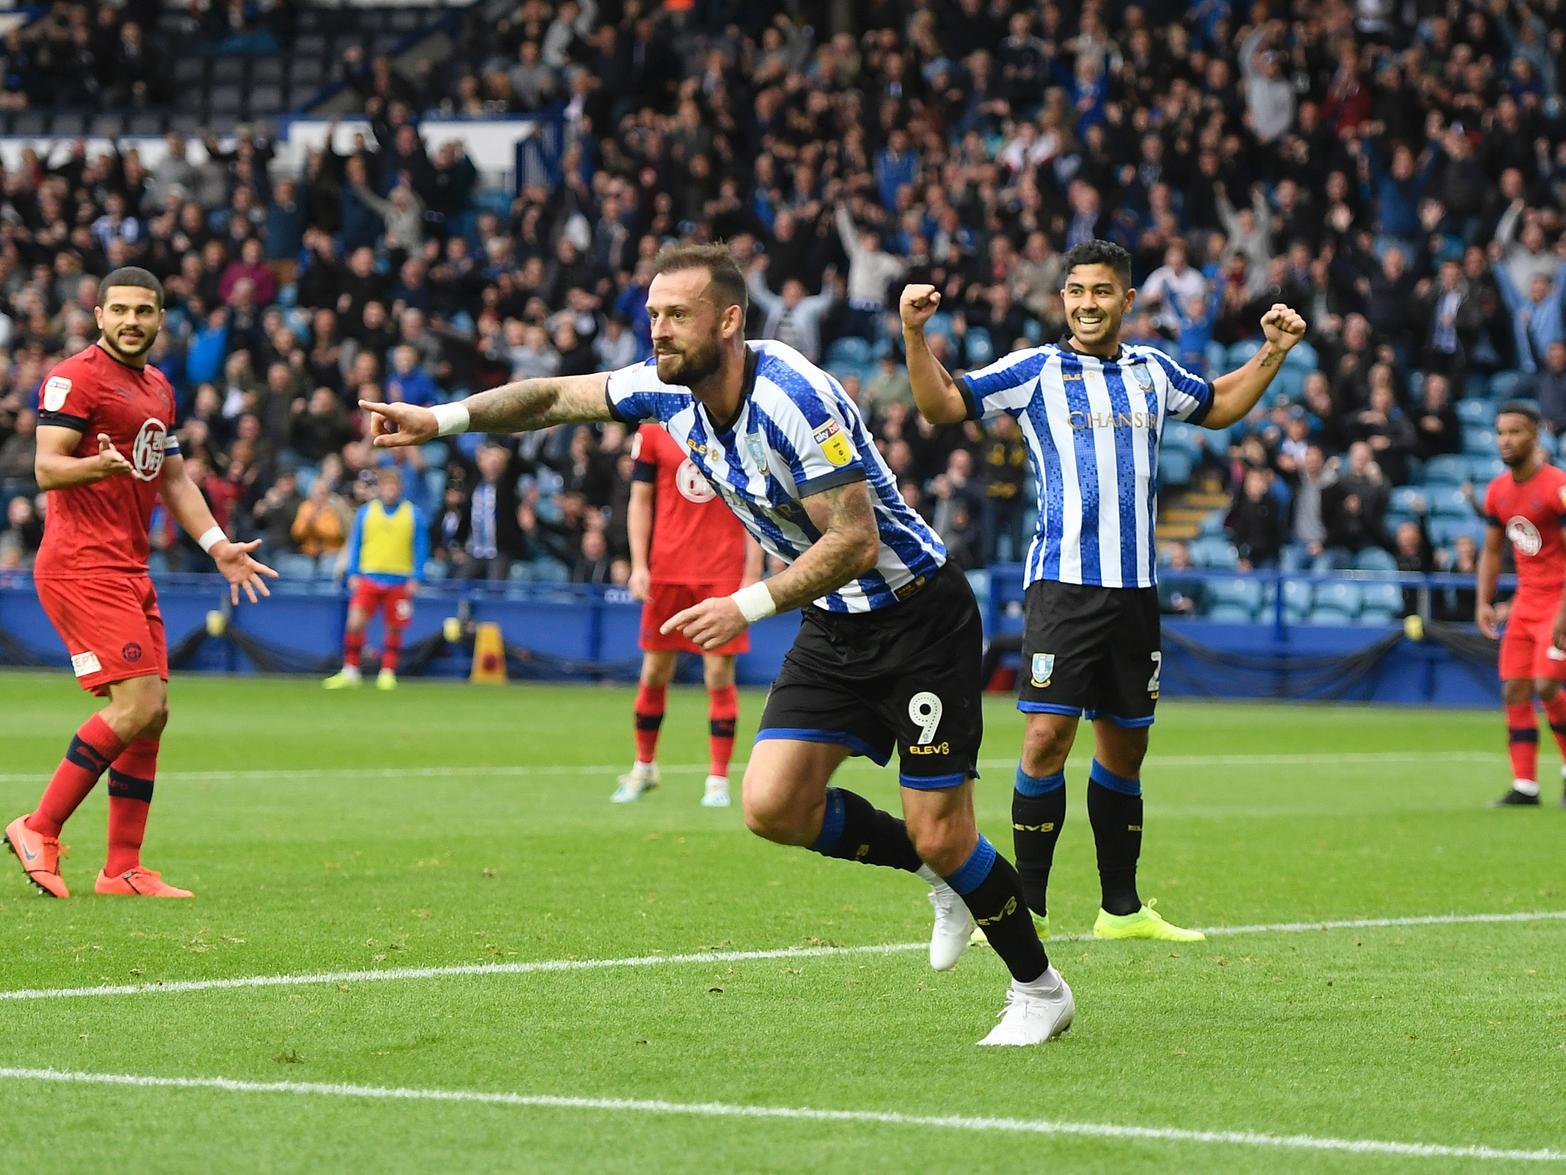 Sheffield Wednesday's hopes of reaching the play-offs this season look to have been given a major boost, with injured star striker Steven Fletcher set to return from injury early next month. (Sheffield Star)